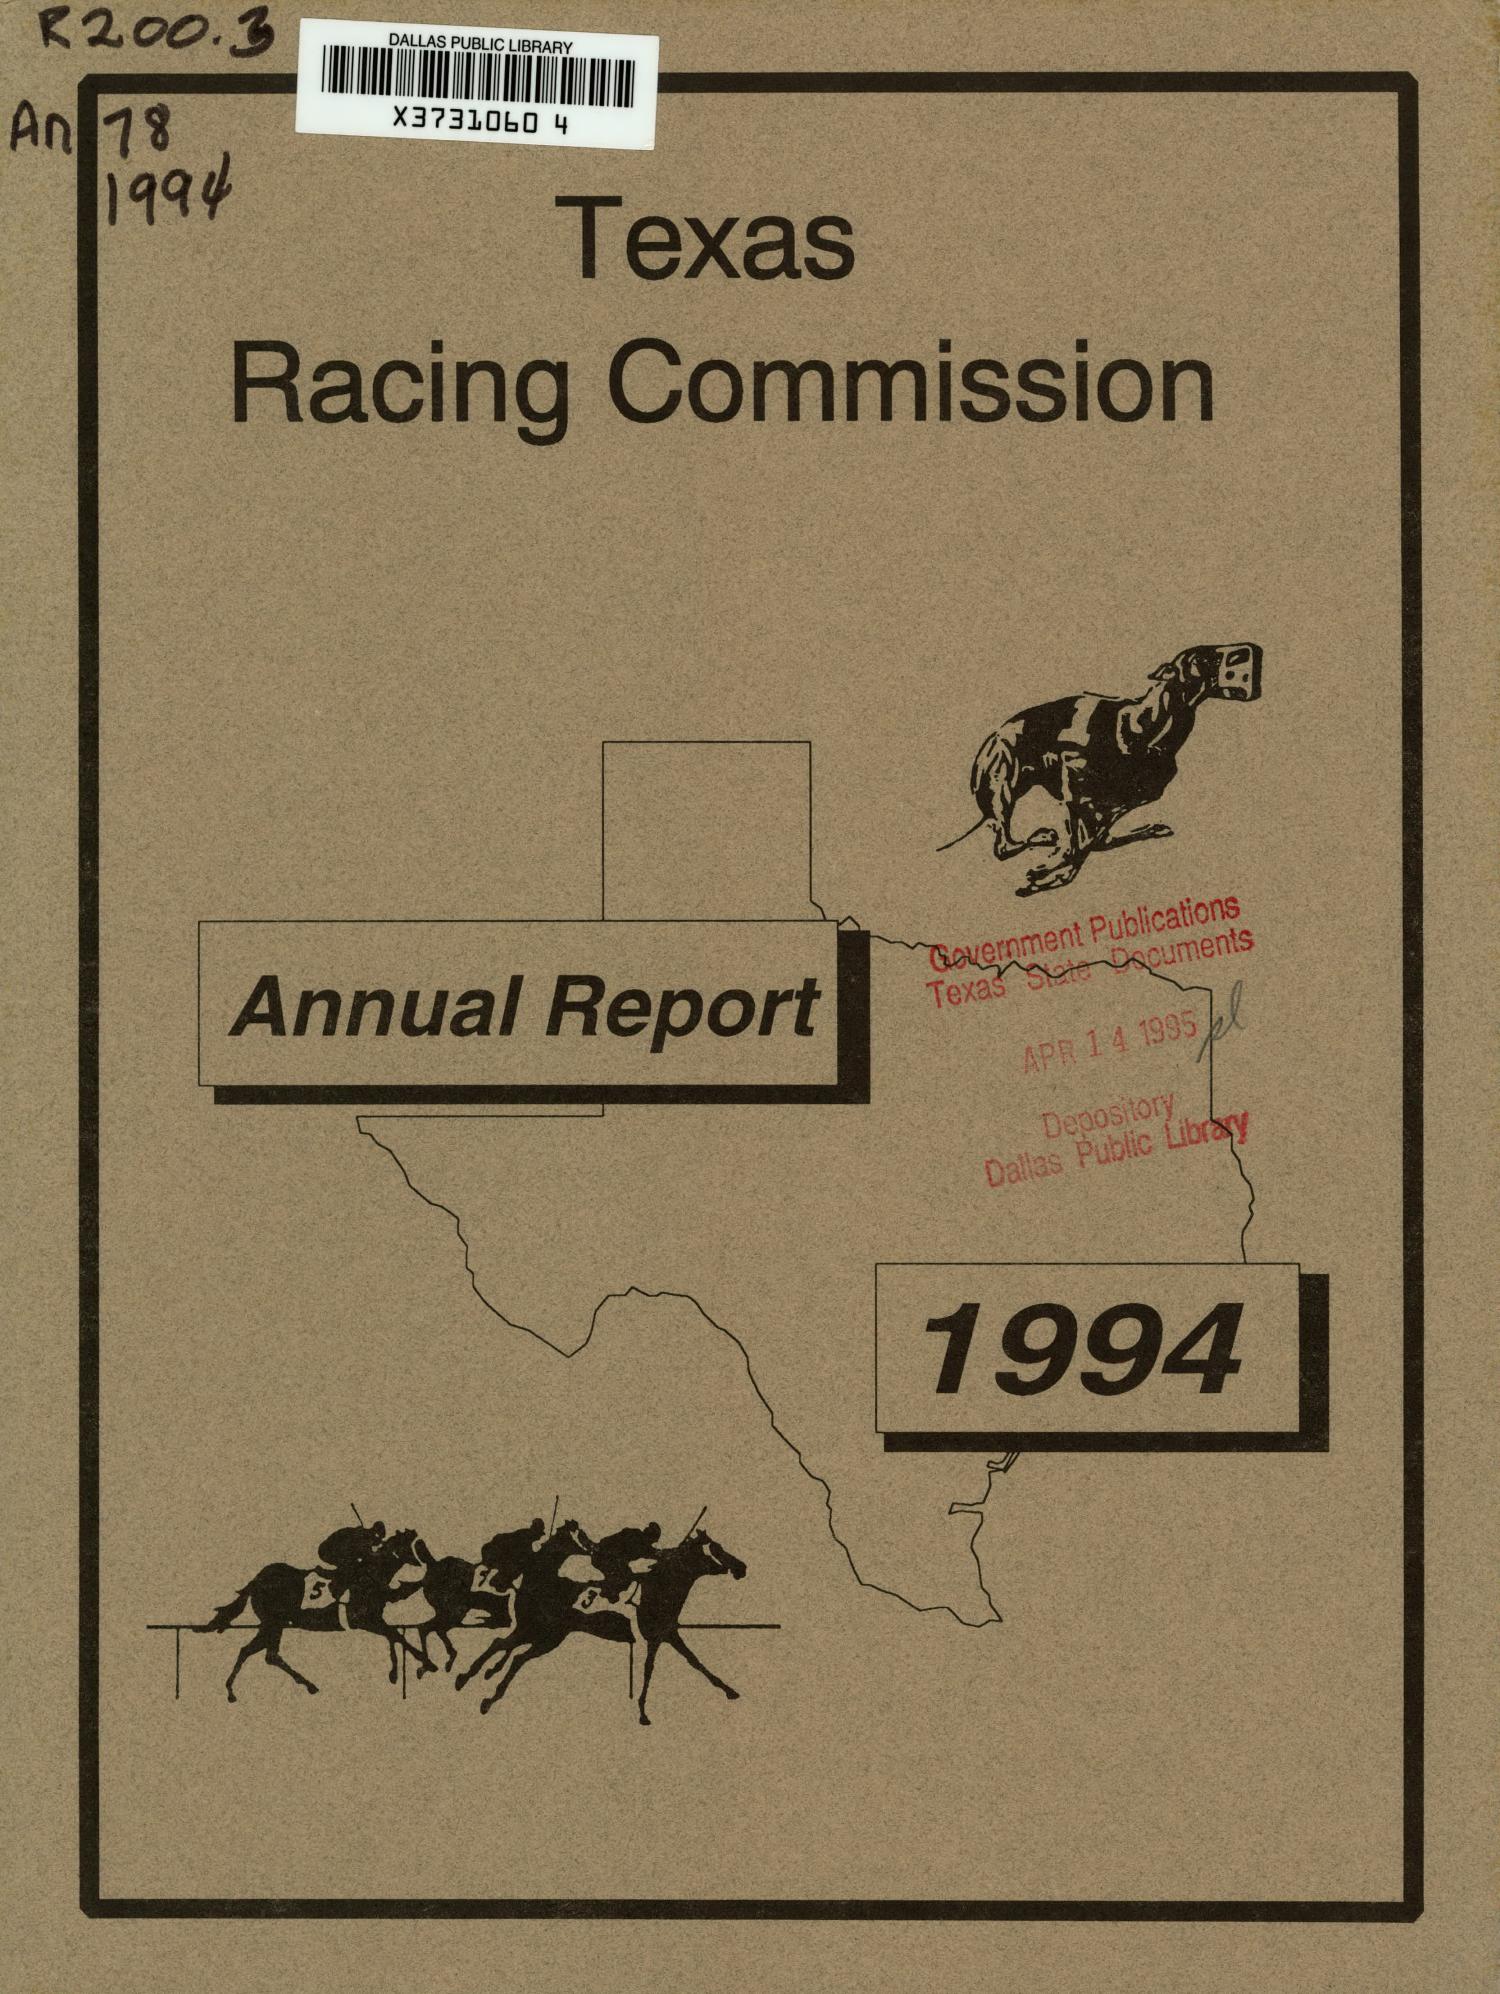 Texas Racing Commission Annual Report: 1994
                                                
                                                    FRONT COVER
                                                